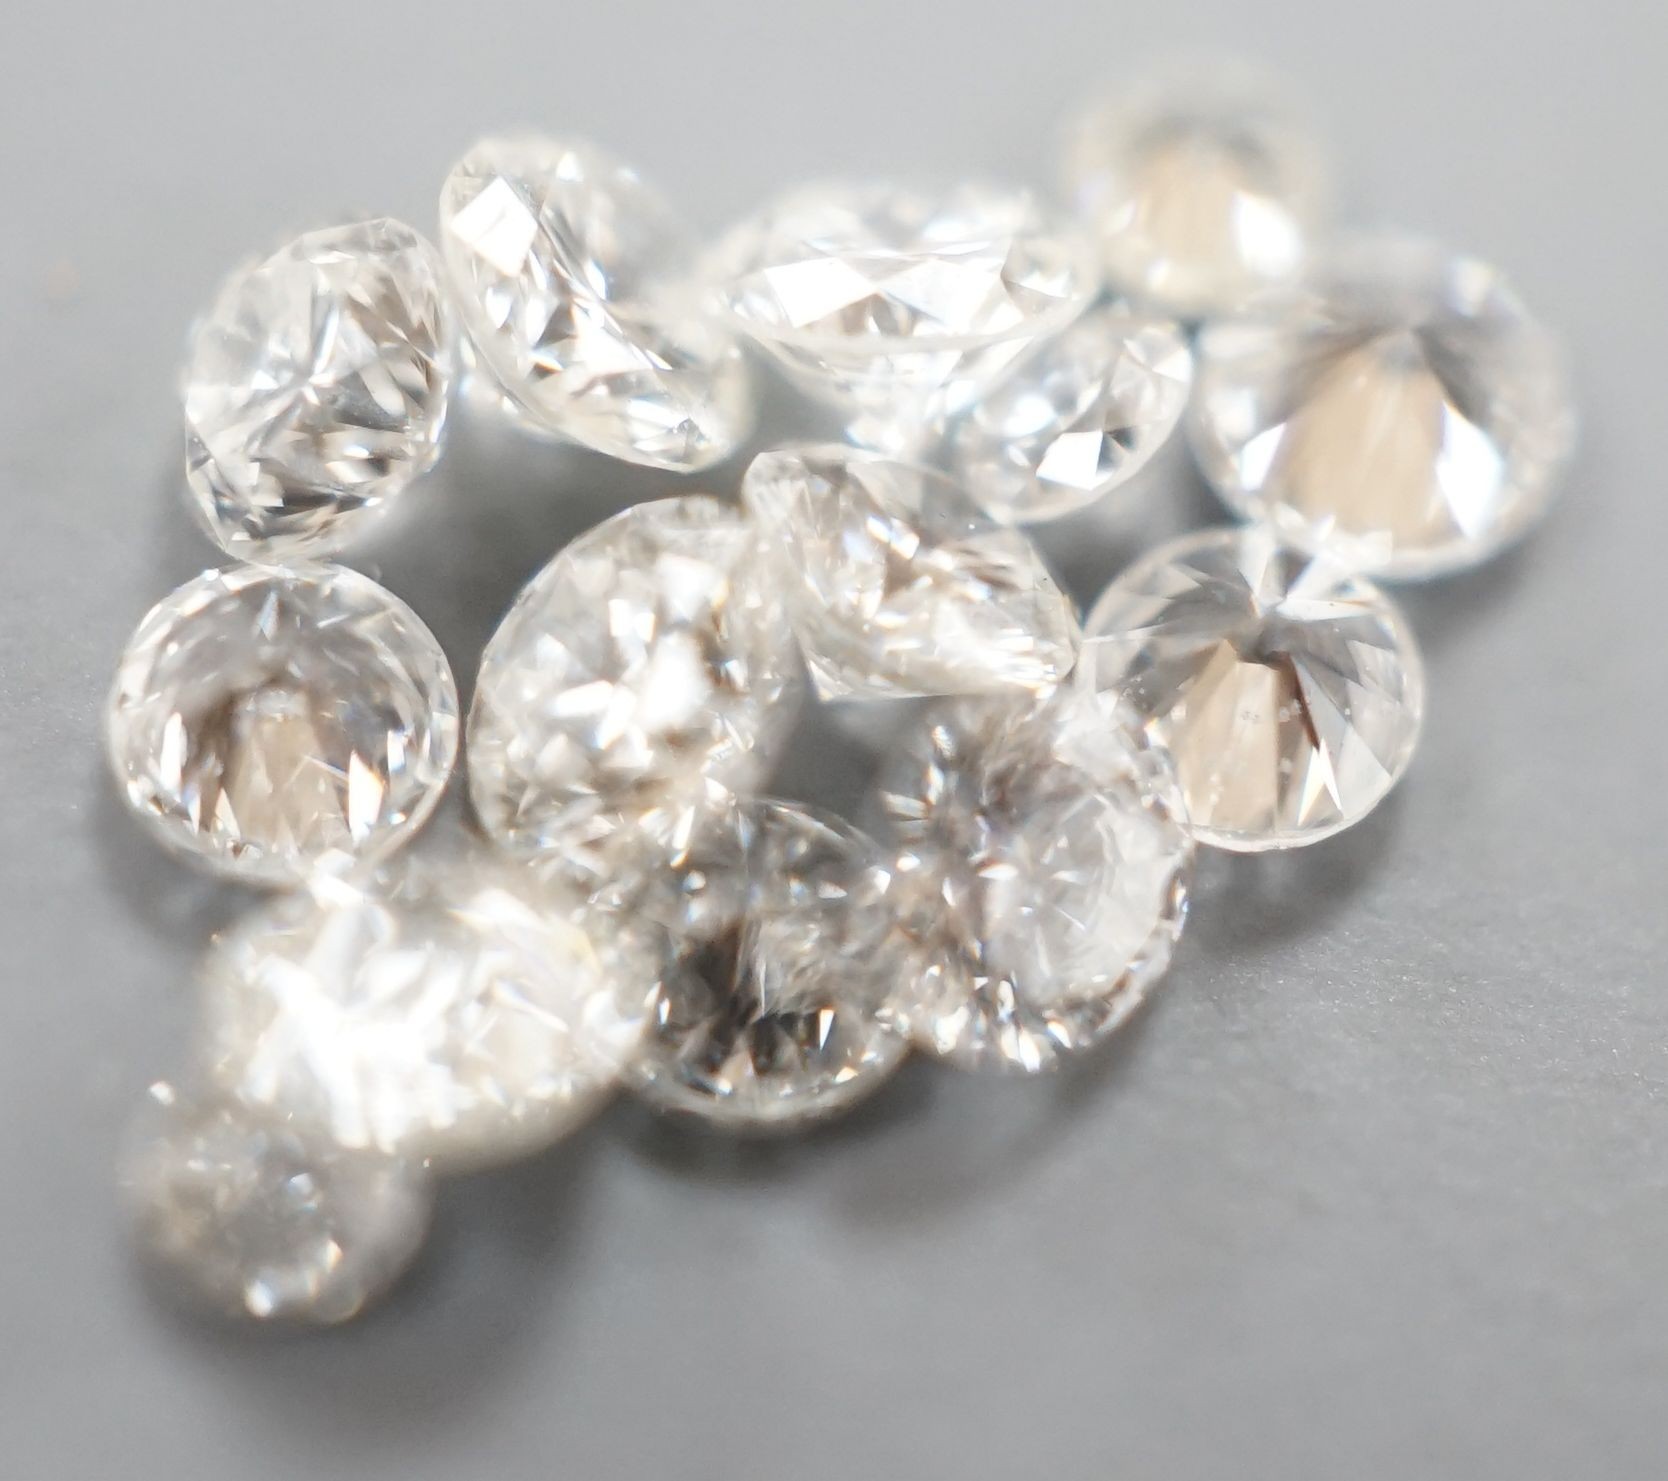 Fourteen small unmounted cut diamonds, total weight approx. 0.58ct.